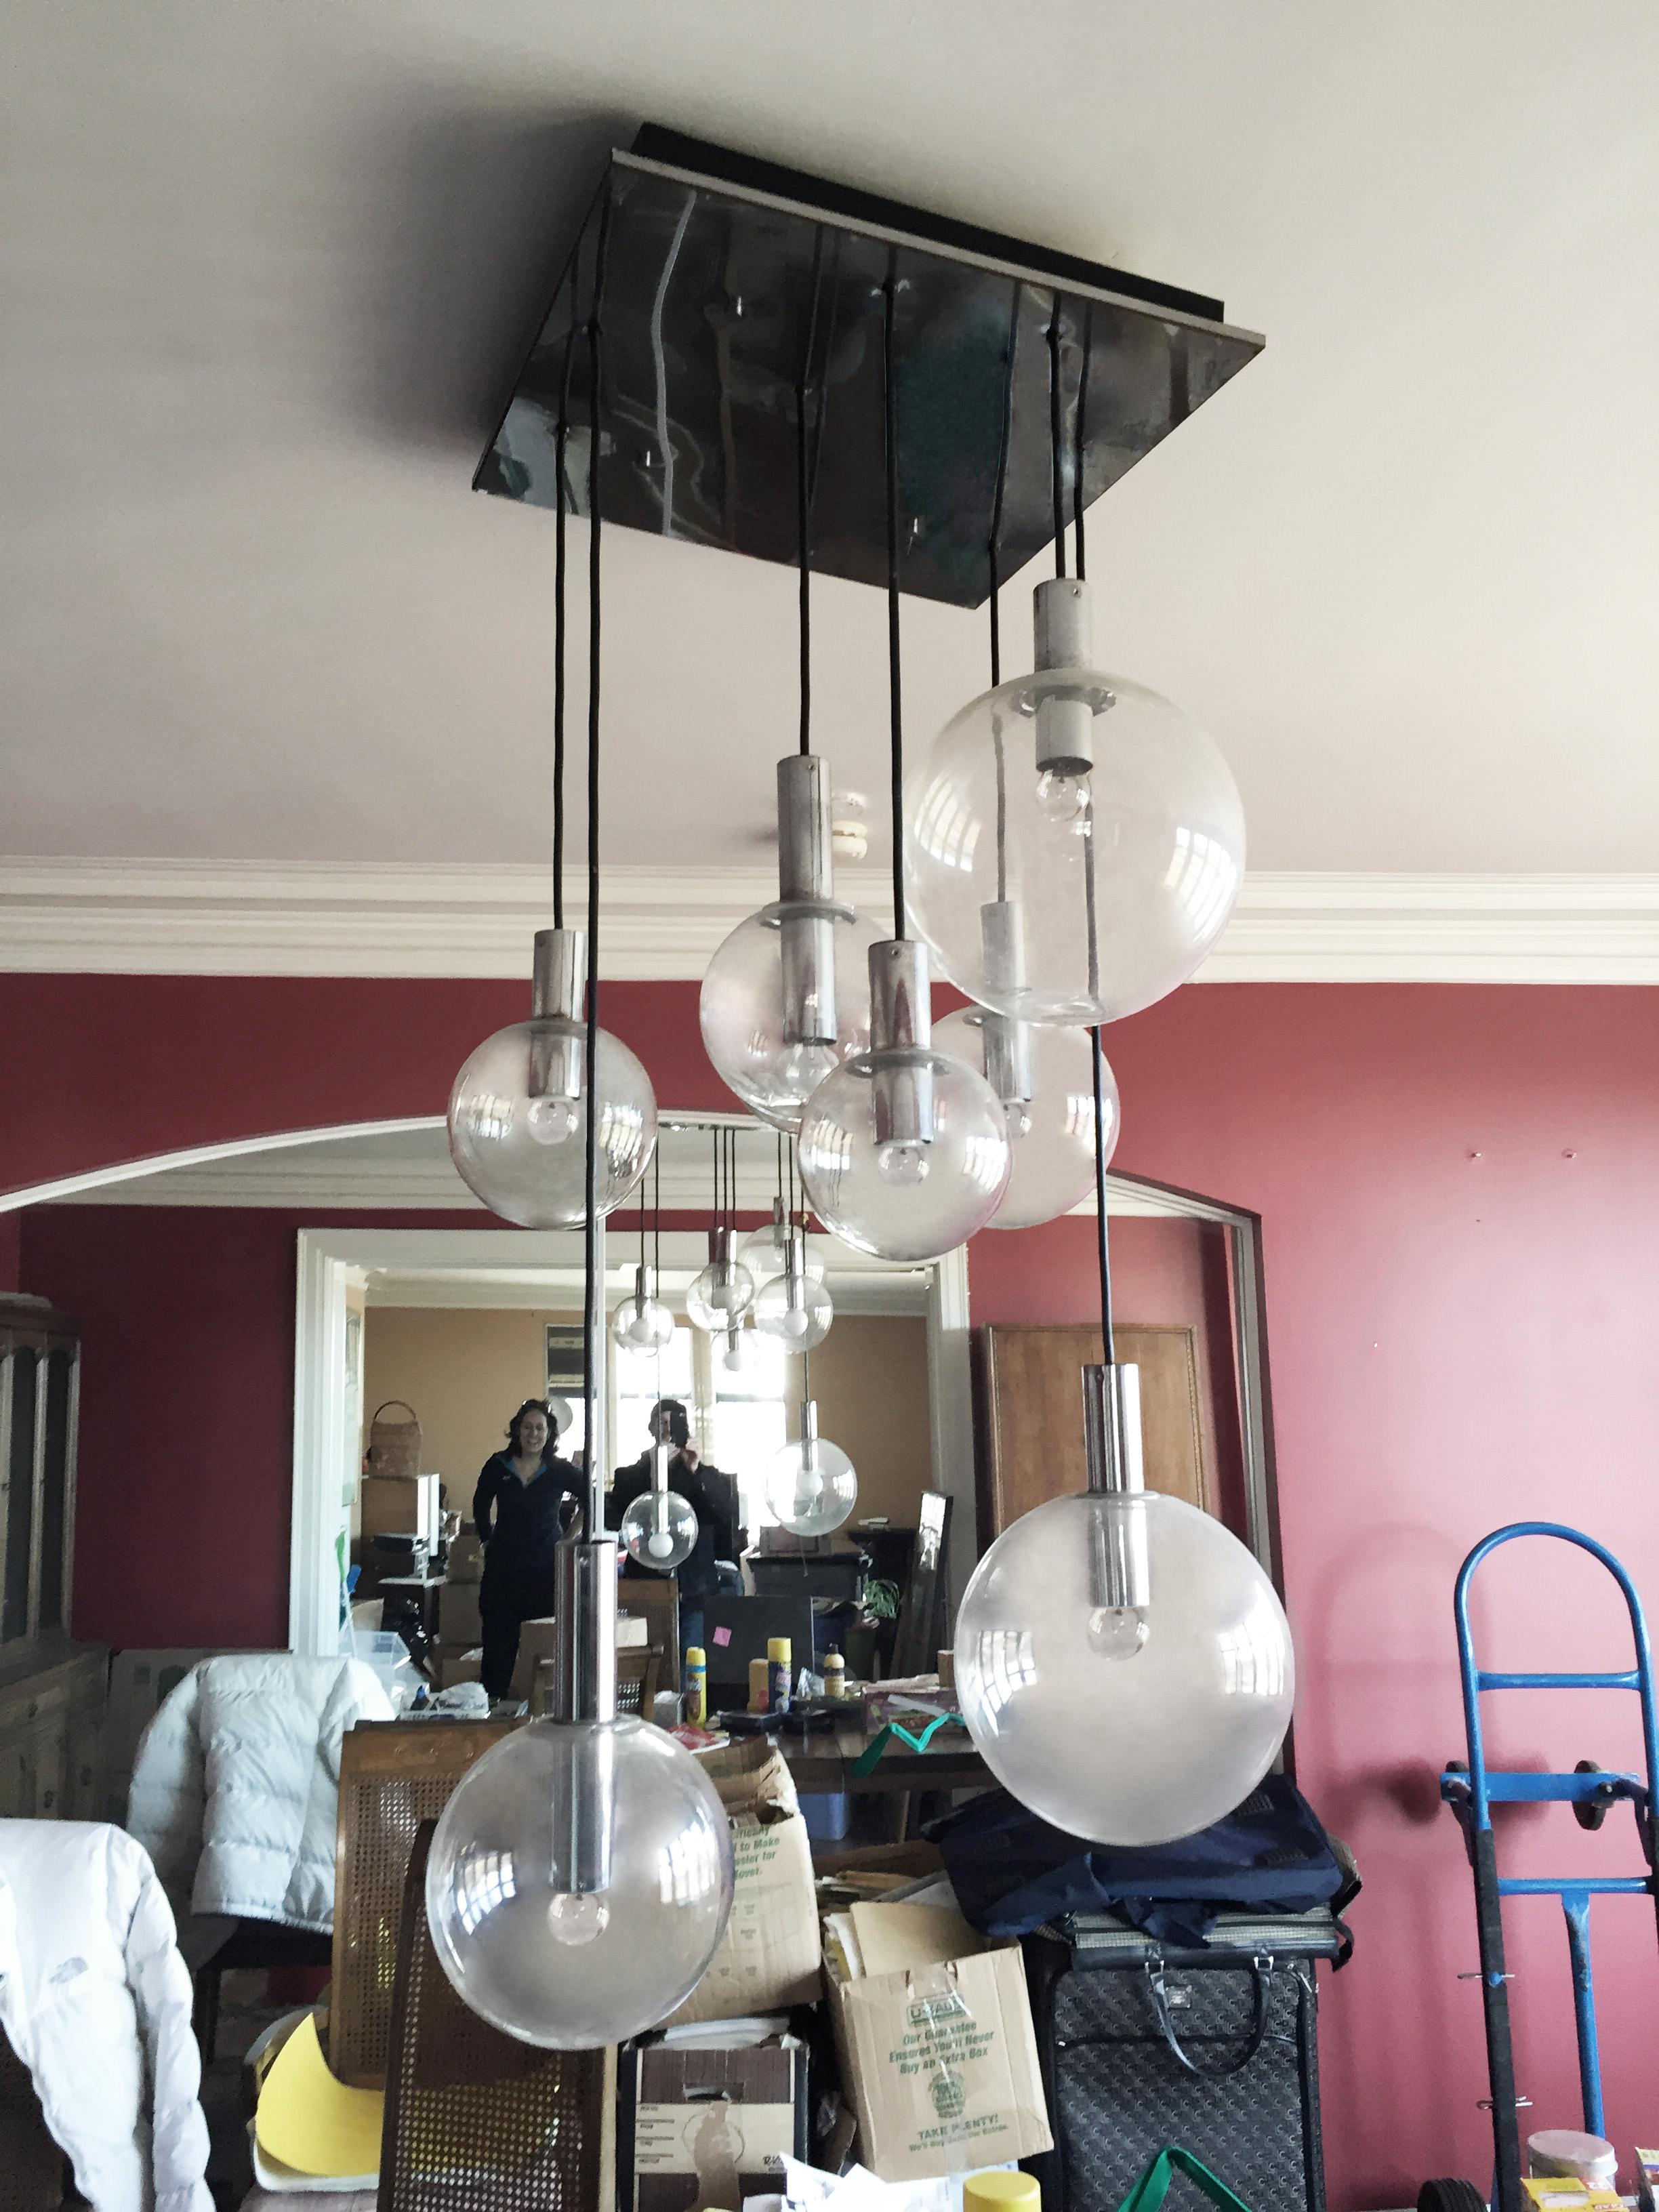 An eight pendant RAAK chandelier. Very nice scale for residential or office. The lamp hanging length can be modified longer or shorter (easily) to ones taste.

may require a few replacement globes pending on perfection. Otherwise very nice!

In the